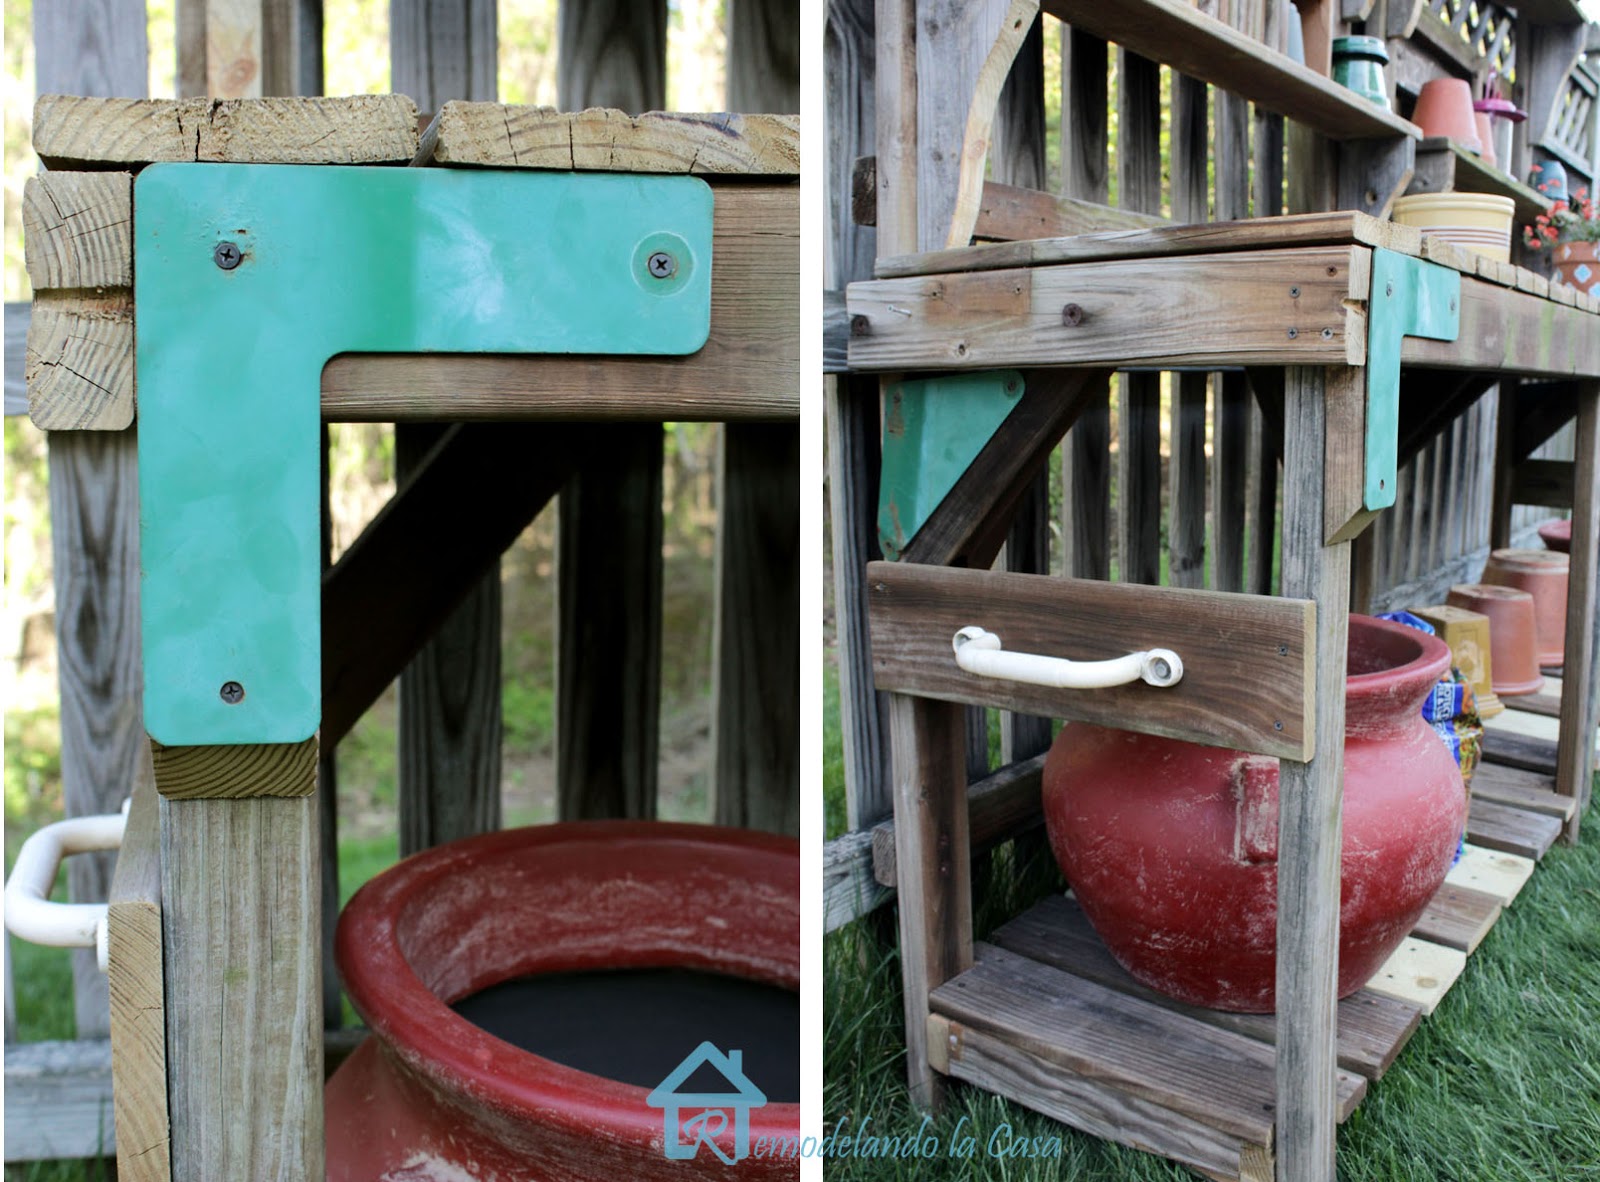 metal parts of a playset used as decor on potting bench